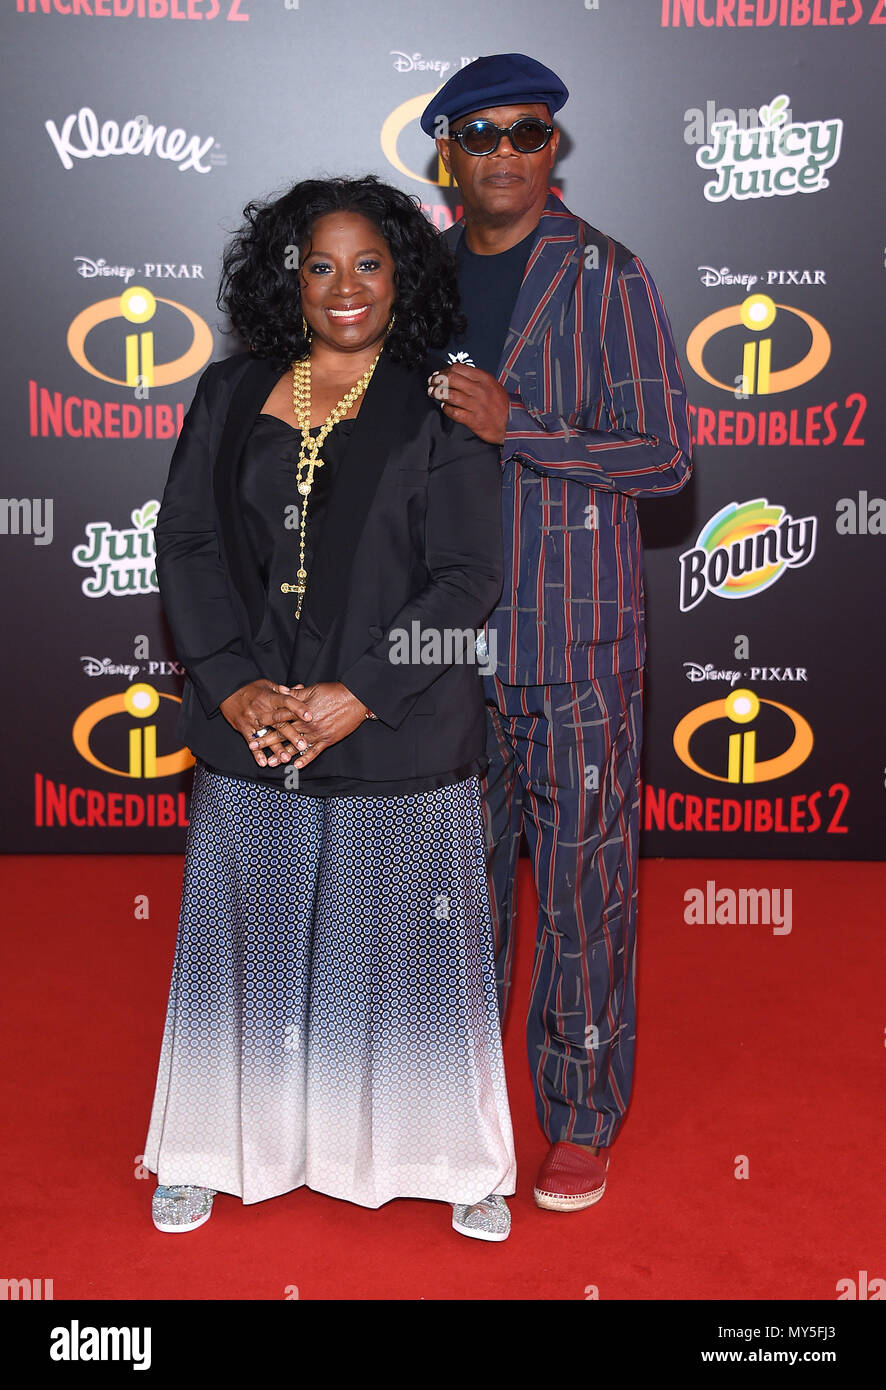 Hollywood, California, USA. 5th June, 2018. LaTanya Richardson and Samuel L.  Jackson arrives for the premiere of the film 'Incredibles 2' at the El  Capitan theater. Credit: Lisa O'Connor/ZUMA Wire/Alamy Live News